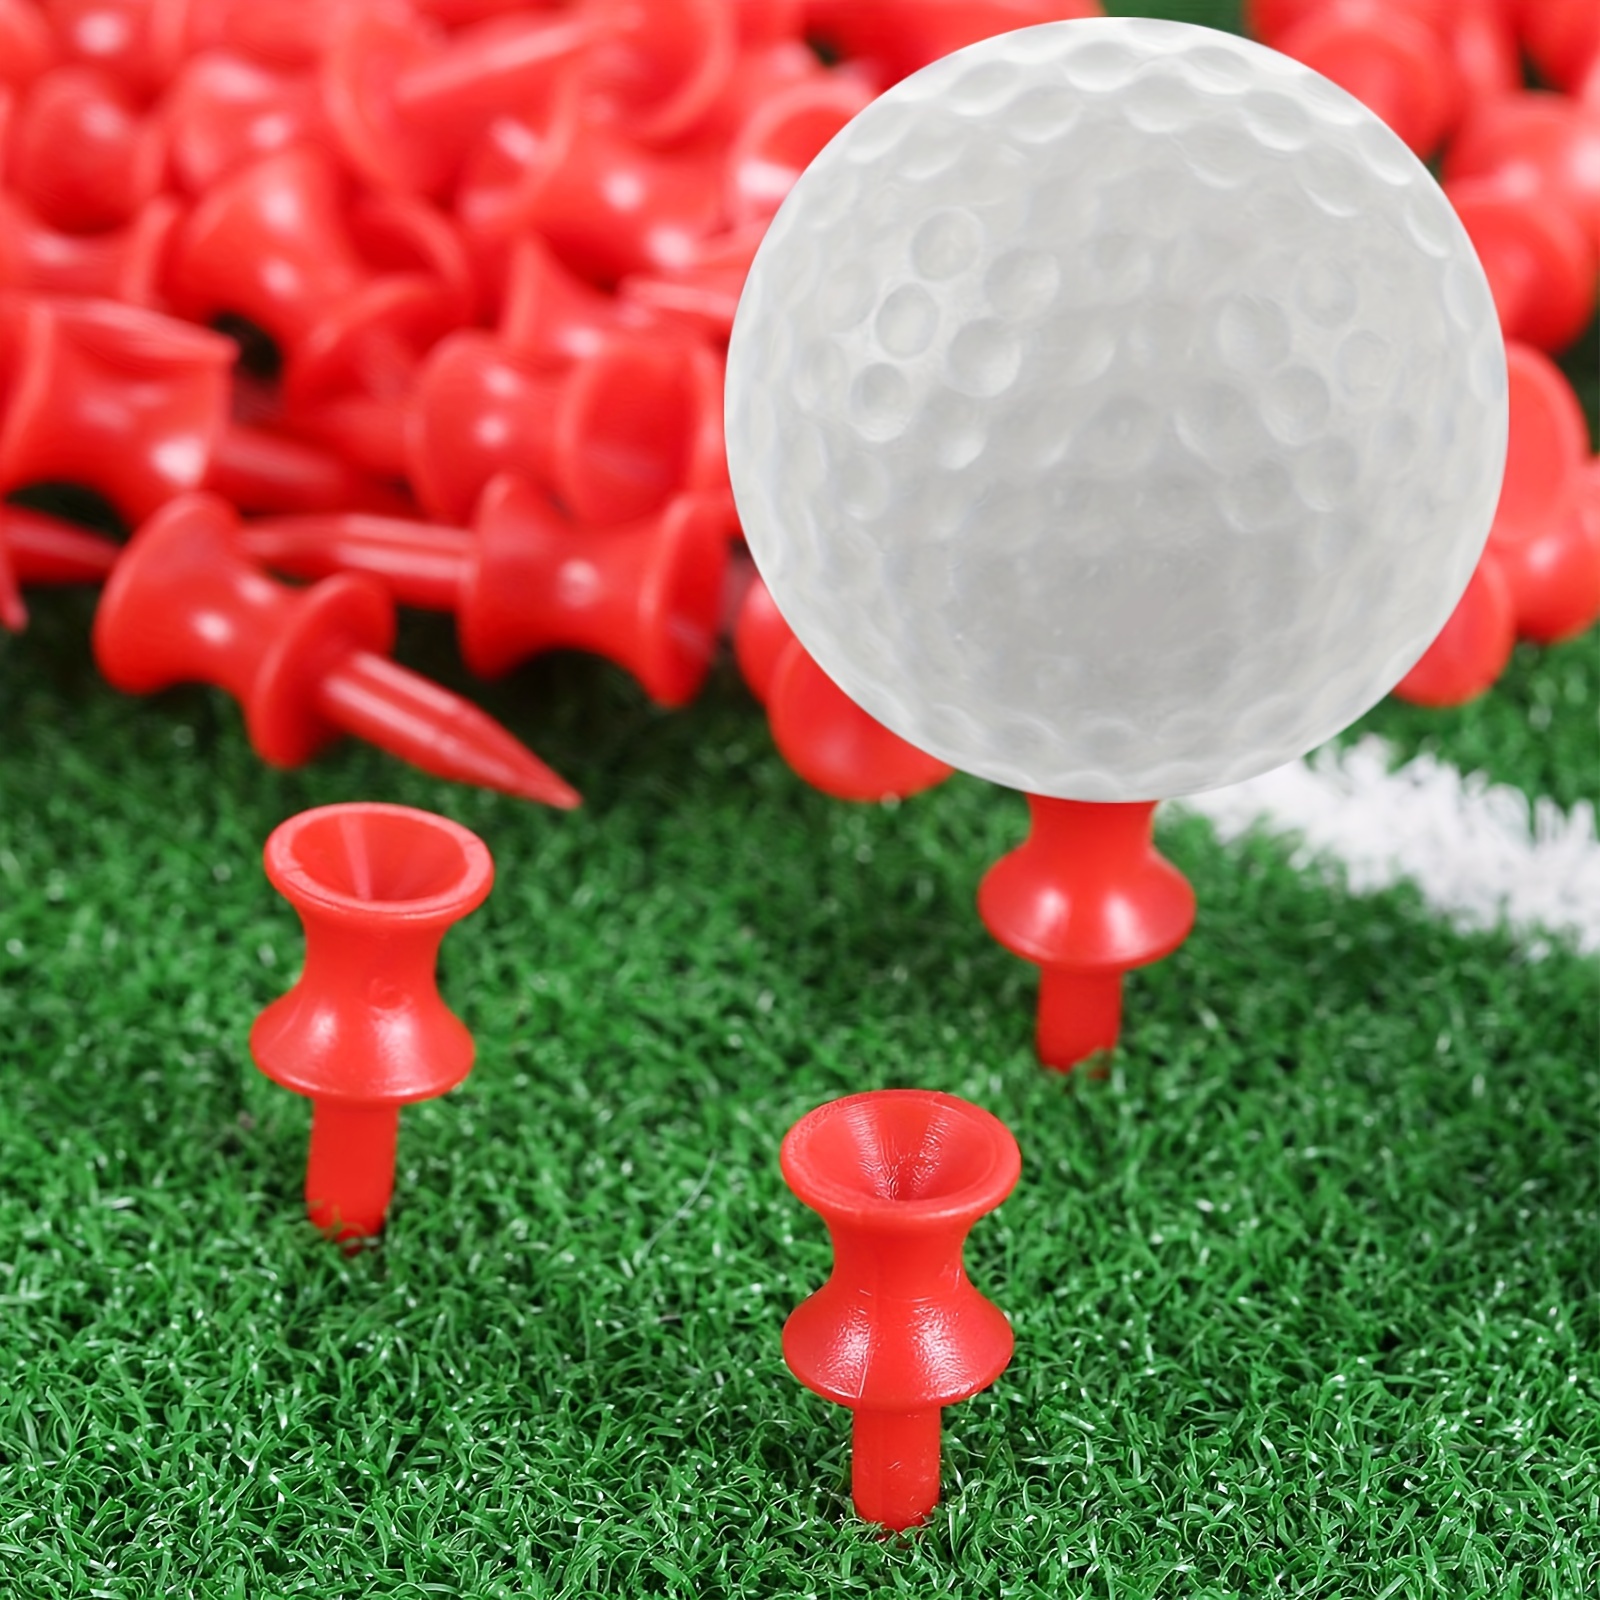 50 100pcs golf tees plastic durable reusable golf tee for practice